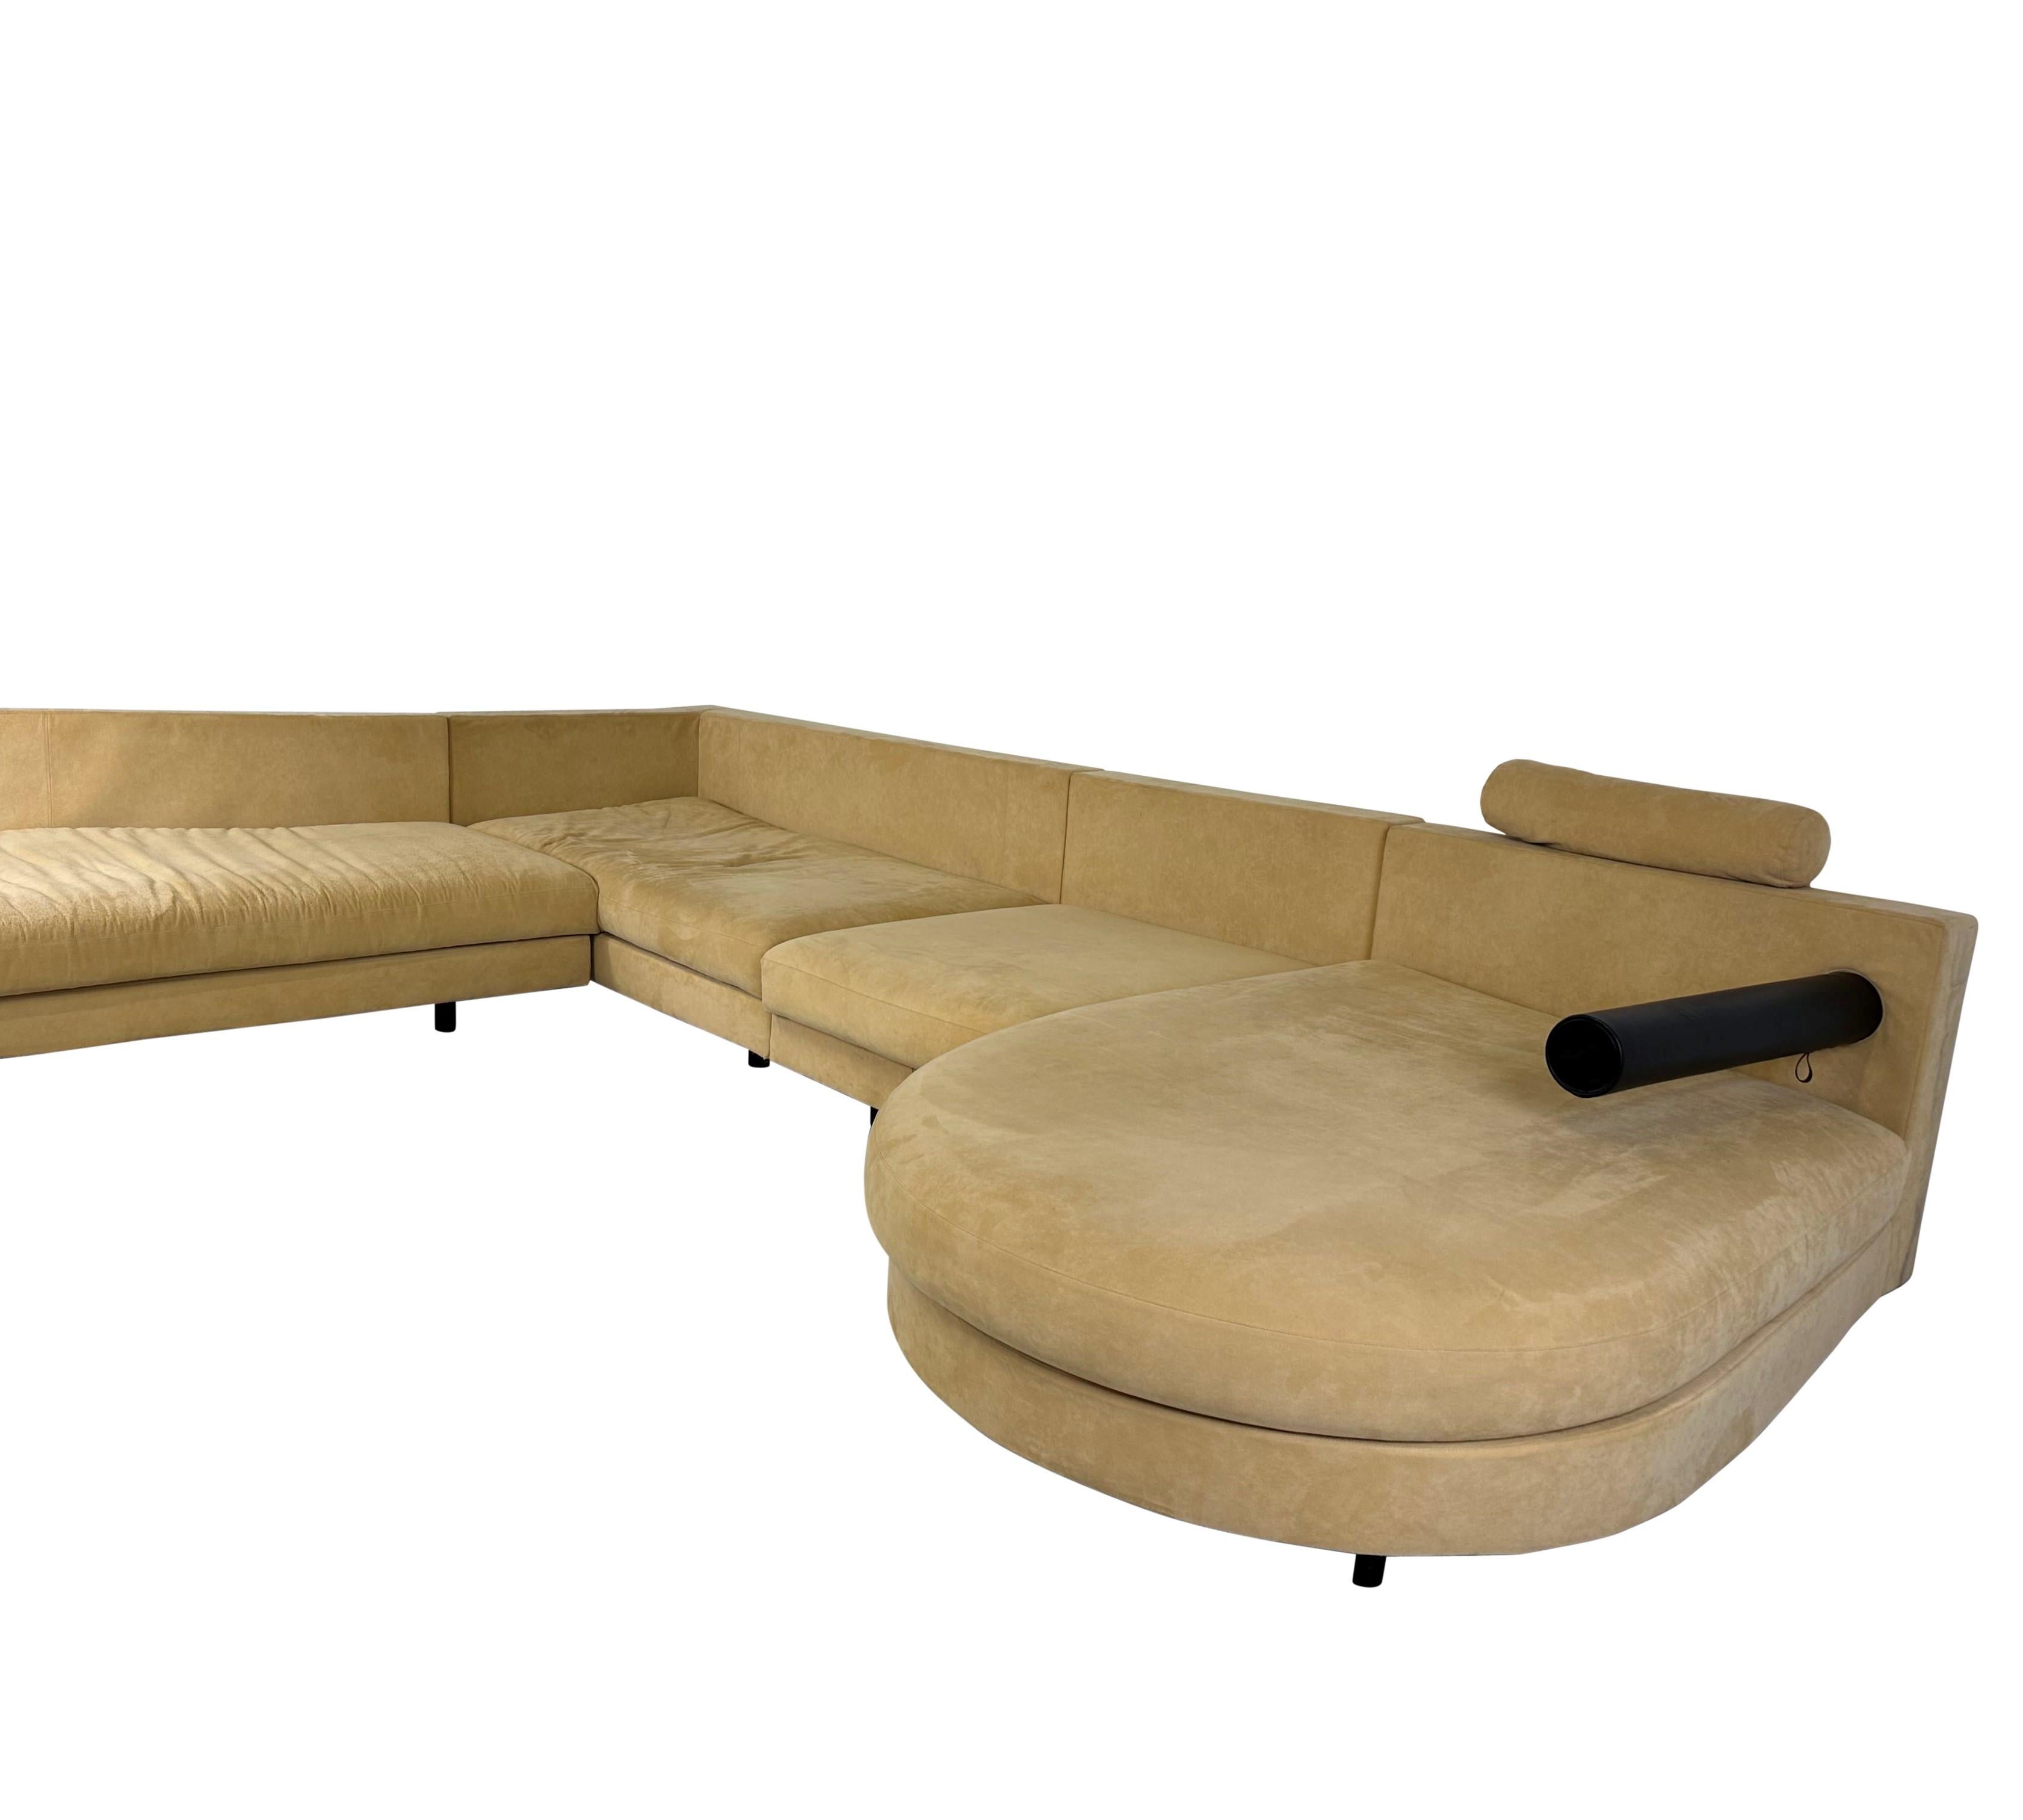 Large 'Sity' sofa set designed by Antonio Citterio for B&B Italia.

This sofa is upholstered in yellow suede and has black leather armrests.

This post modern sofa offers a large seating area nd great comfort thanks to the daybed